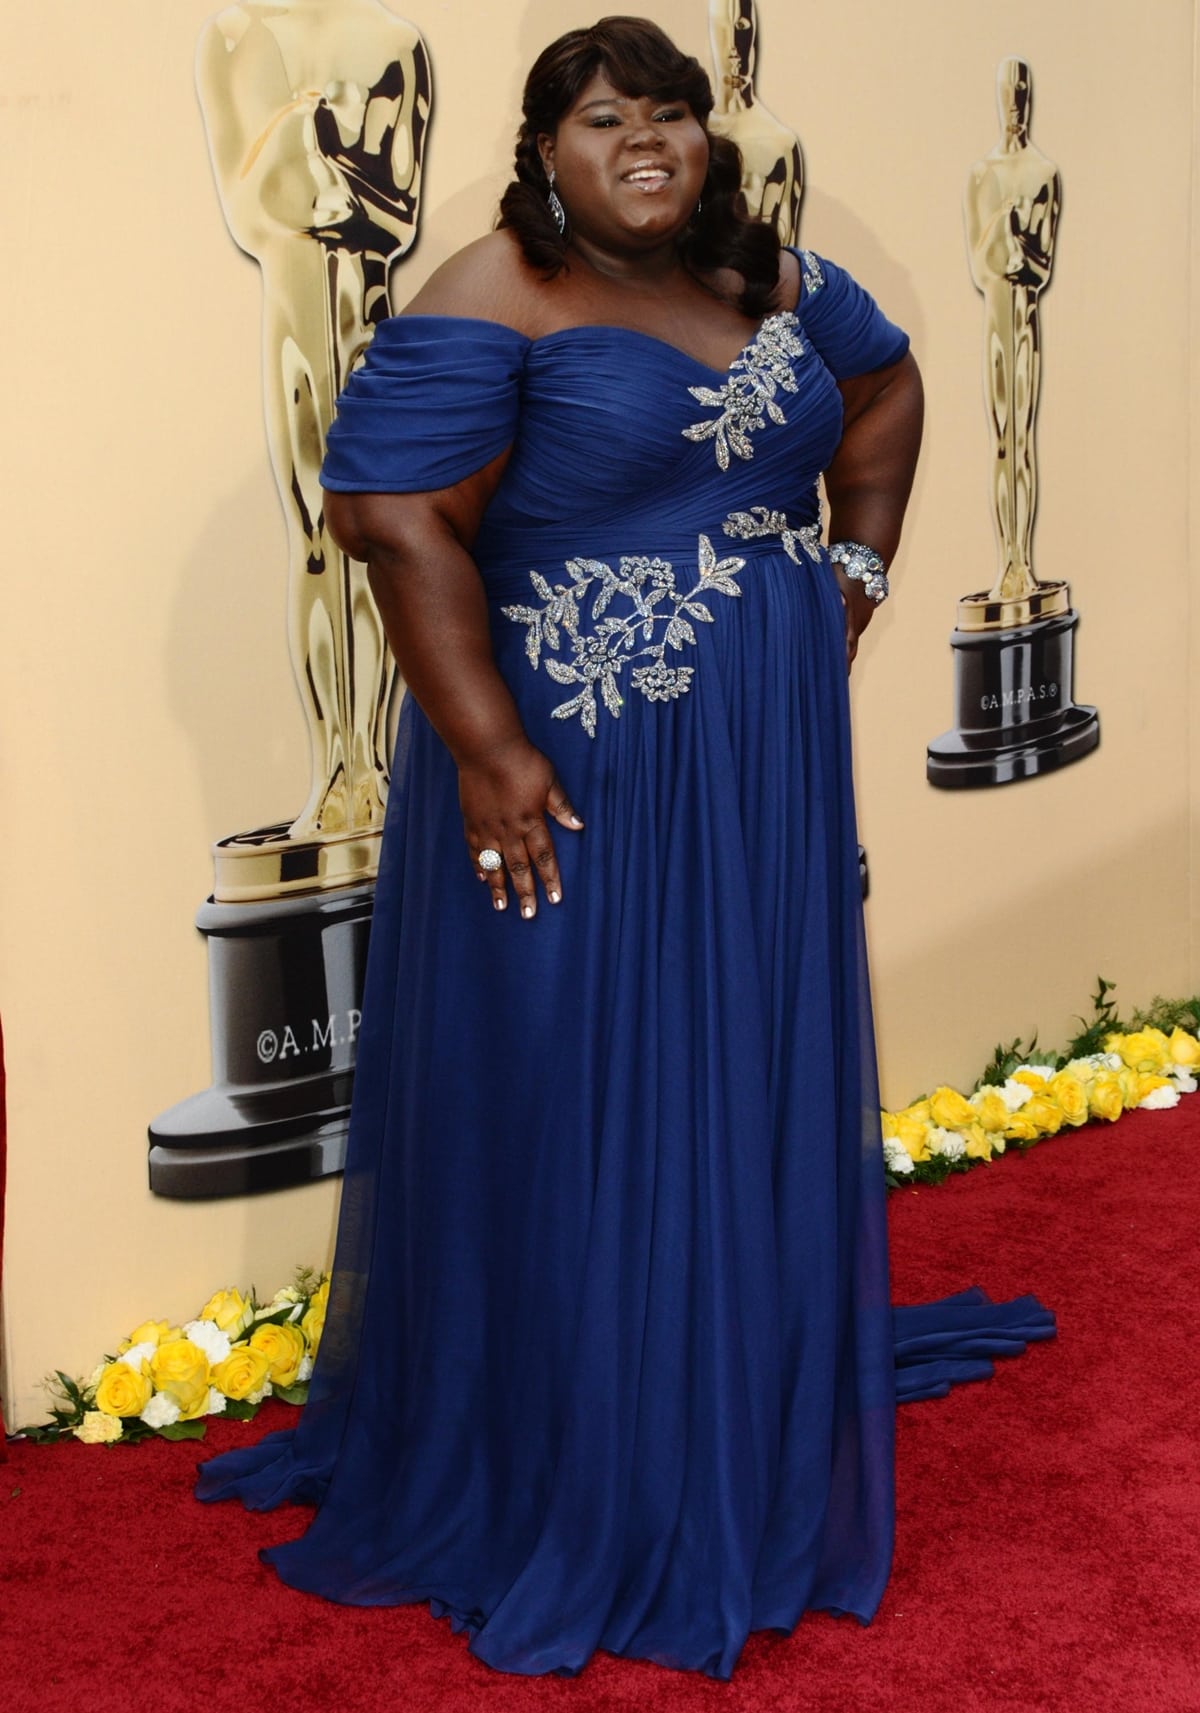 Gabourey 'Gabby' Sidibe in a sparkling blue off-the-shoulder Marchesa dress at the 82nd Annual Academy Awards